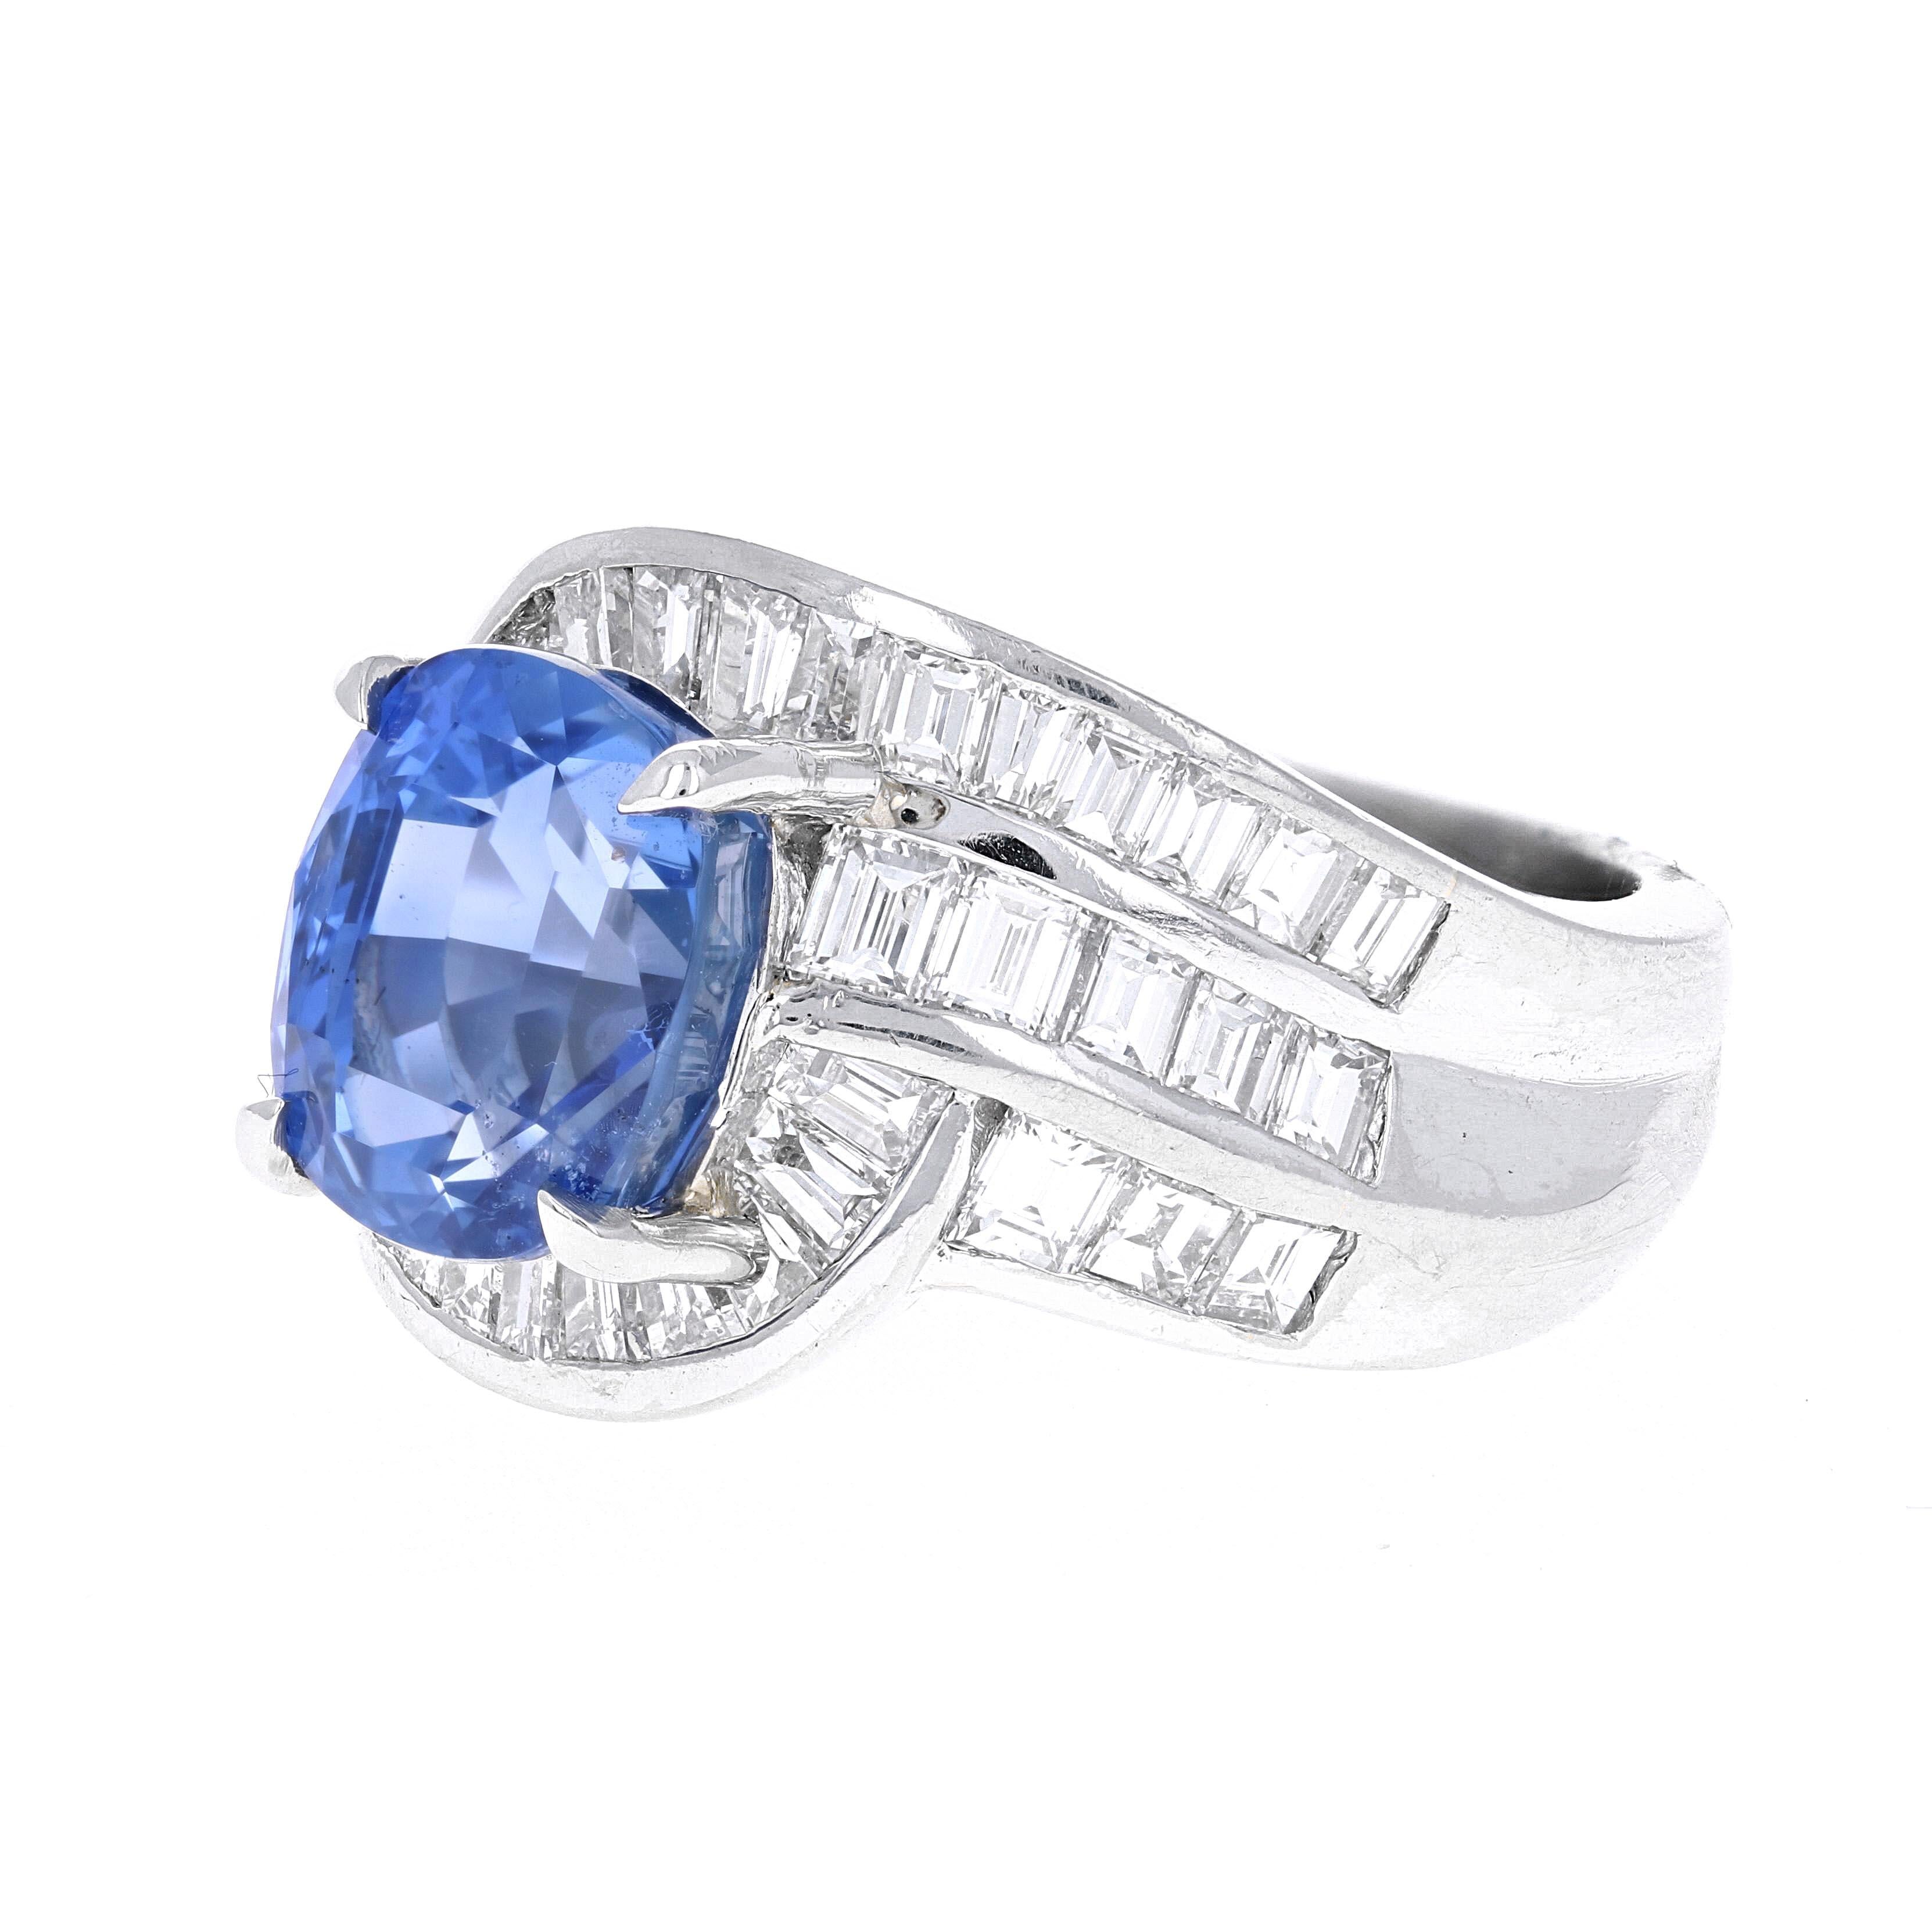 This 5.54 carat blue sapphire and diamond cocktail ring is crafted beautifully in a unique platinum mounting. The mounting is made with 30 diamond baguettes, G-H color/ VS-SI clarity, weighing approximately 2.39 carats. The blue sapphire has a GRS